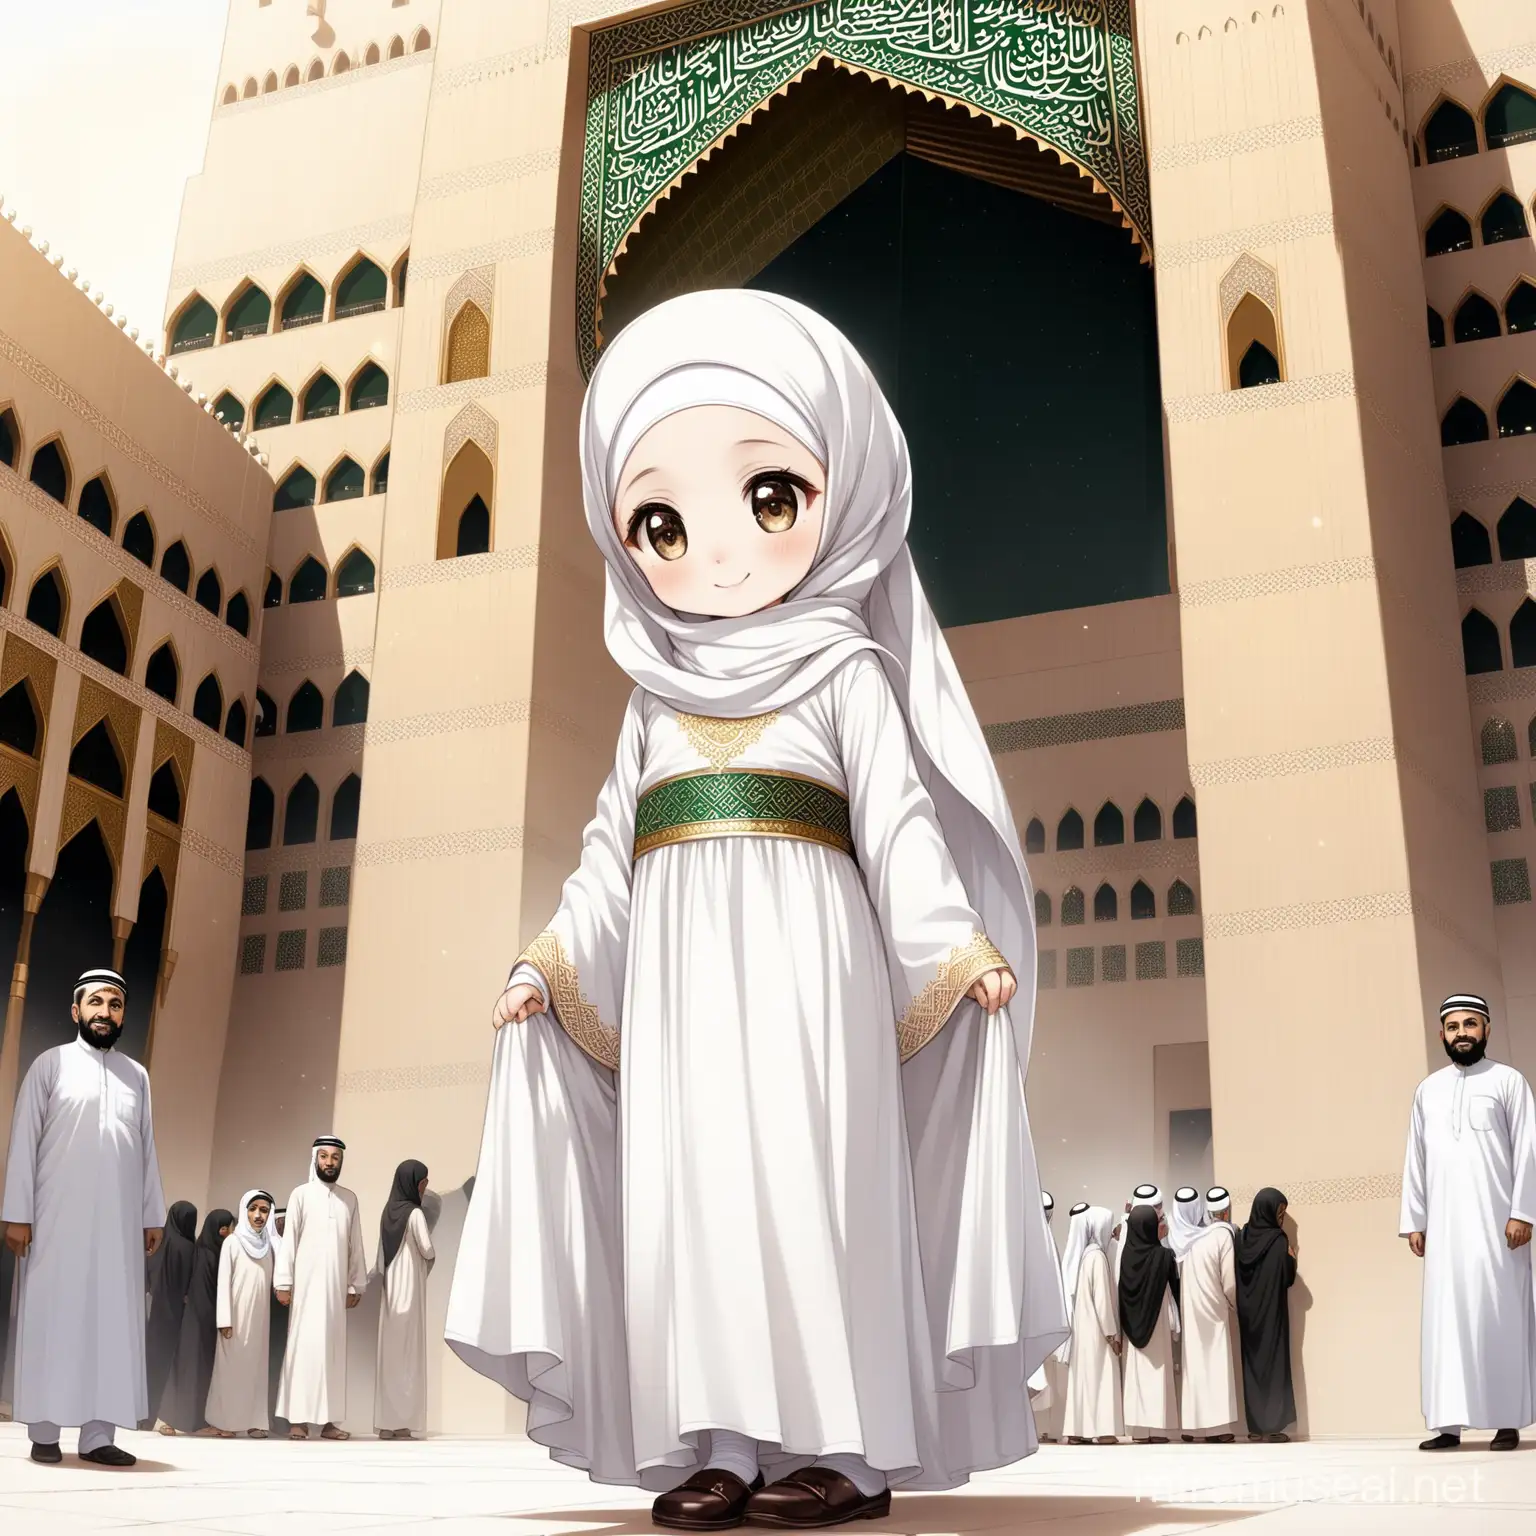 Character Persian little girl(full height, Muslim, with emphasis no hair out of veil(Hijab), smaller eyes, bigger nose, white skin, cute, smiling, wearing socks, clothes full of Persian designs) with her both father(not Arab) and mother.

Atmosphere Kaaba building in Mecca, yard, nobody, big white flag in one hand proudly.